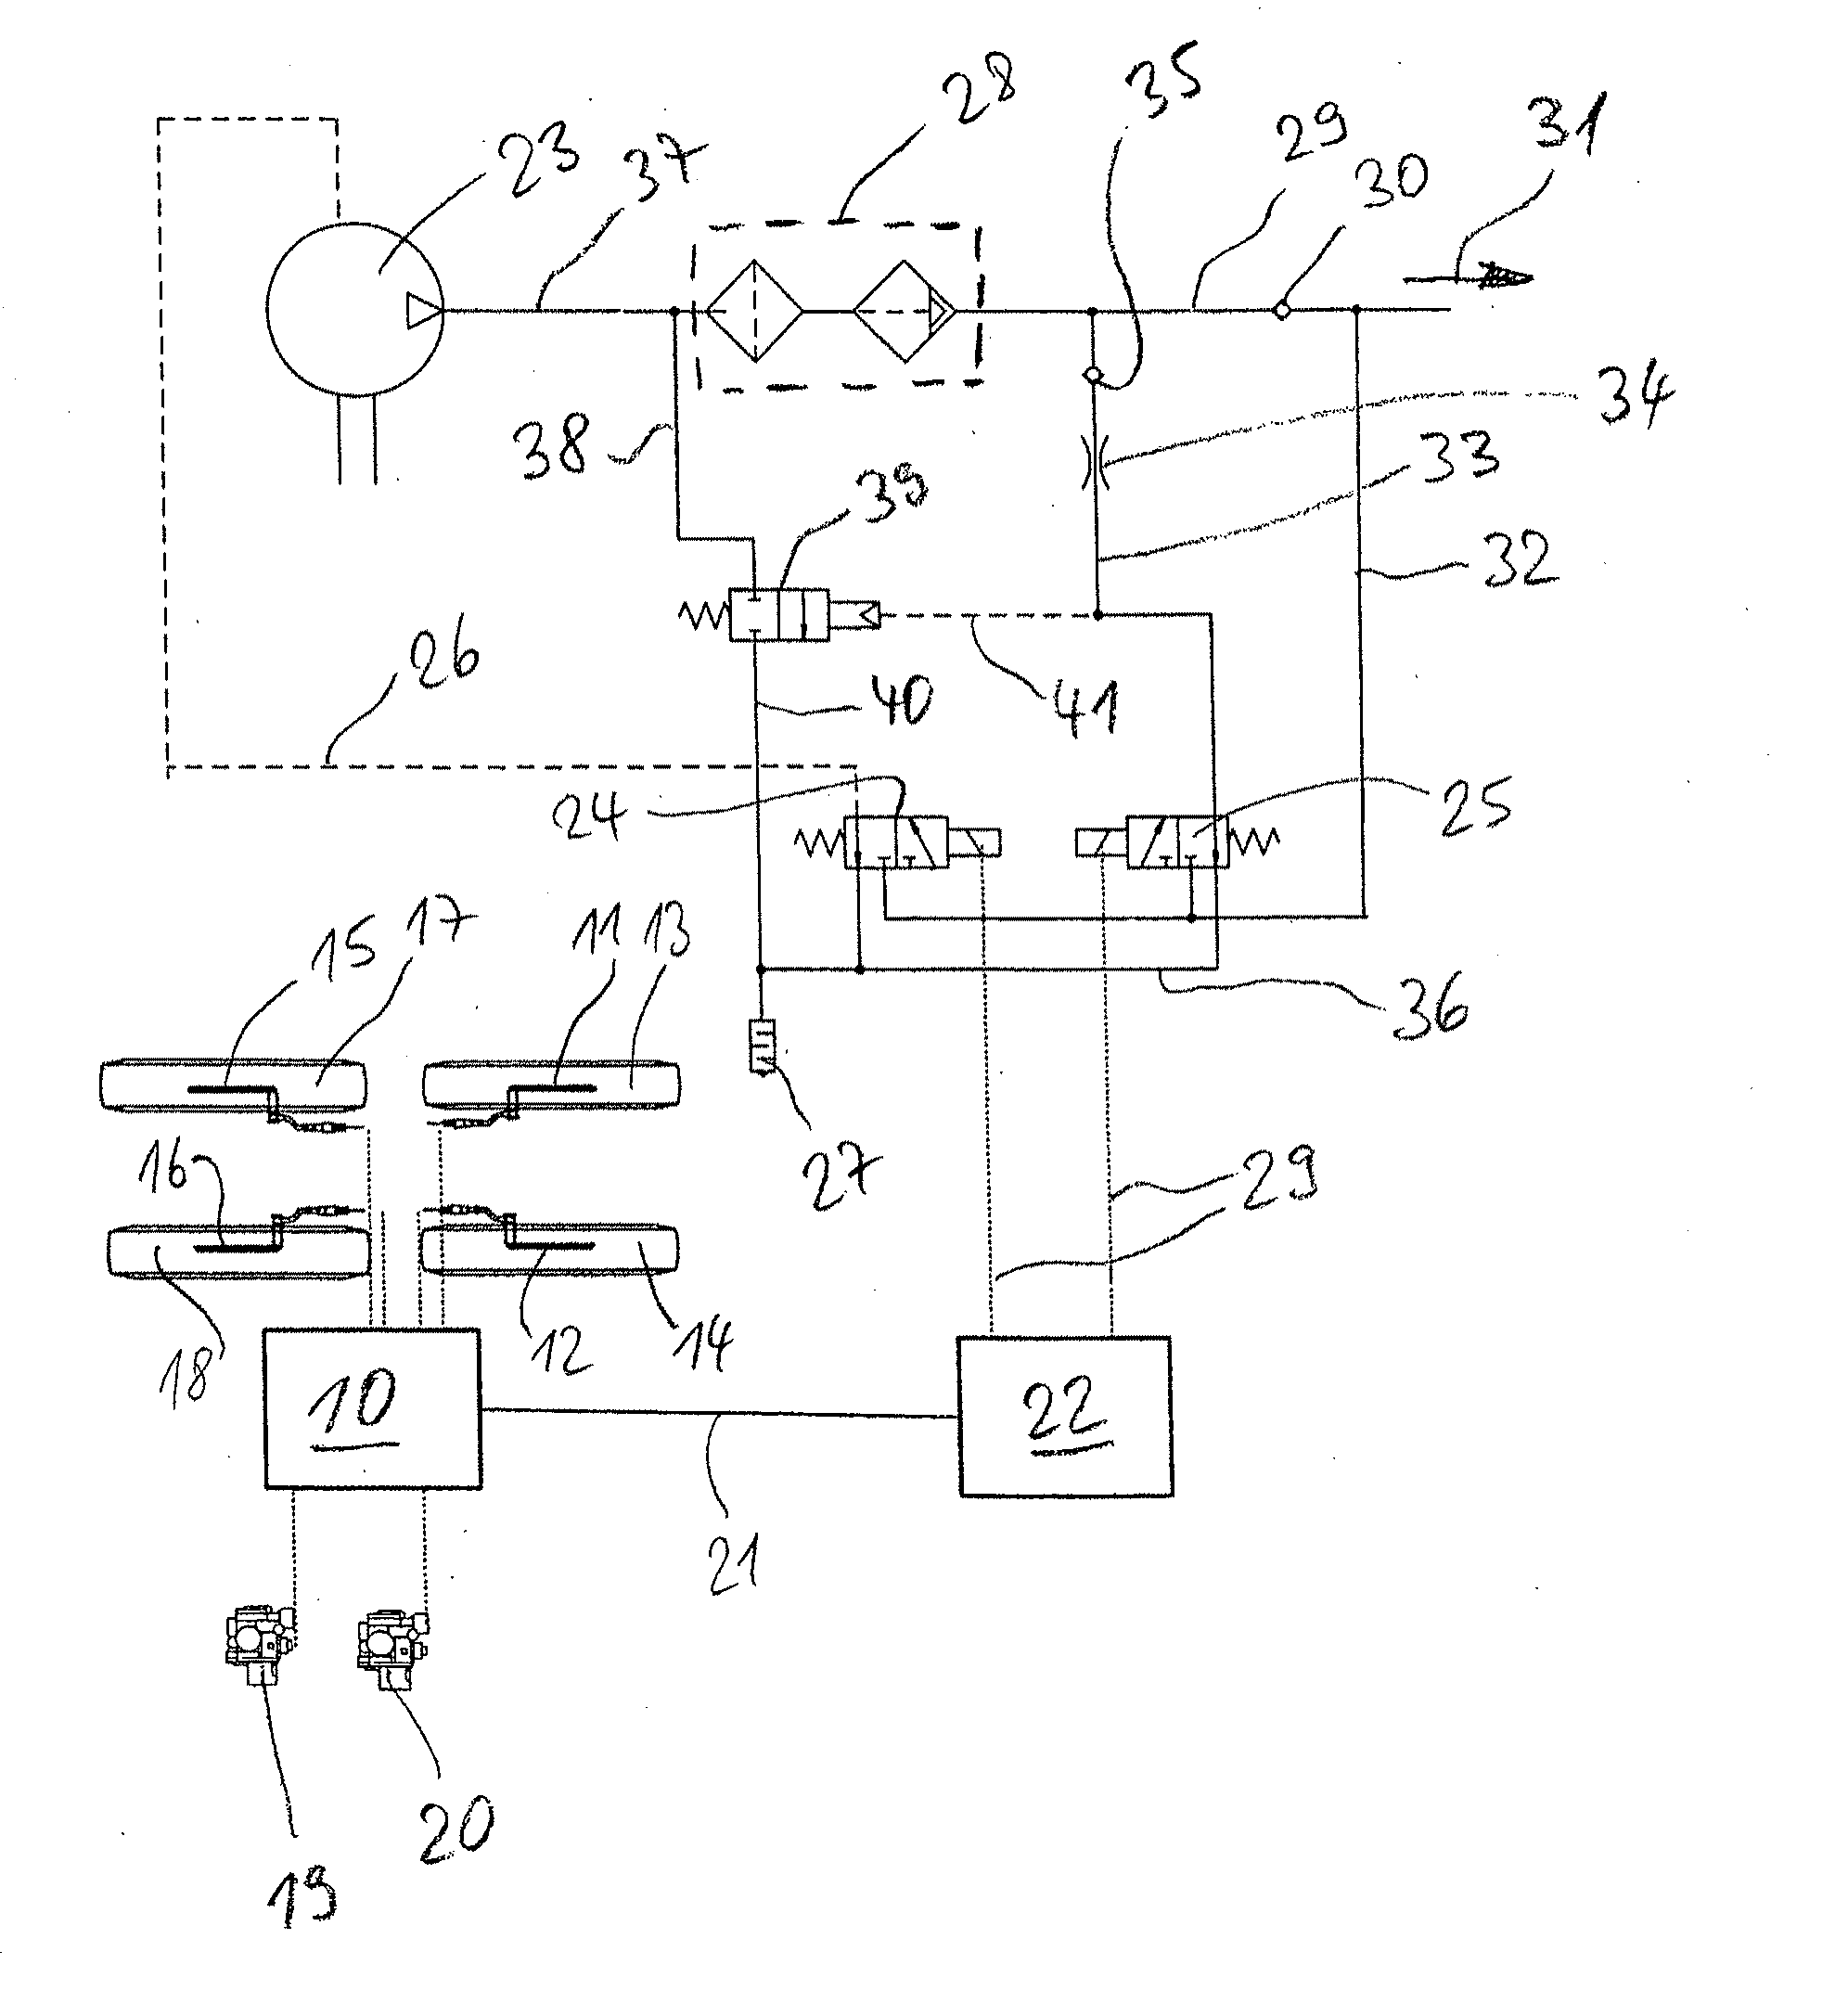 Method for Operating a Compressed Air Brake System